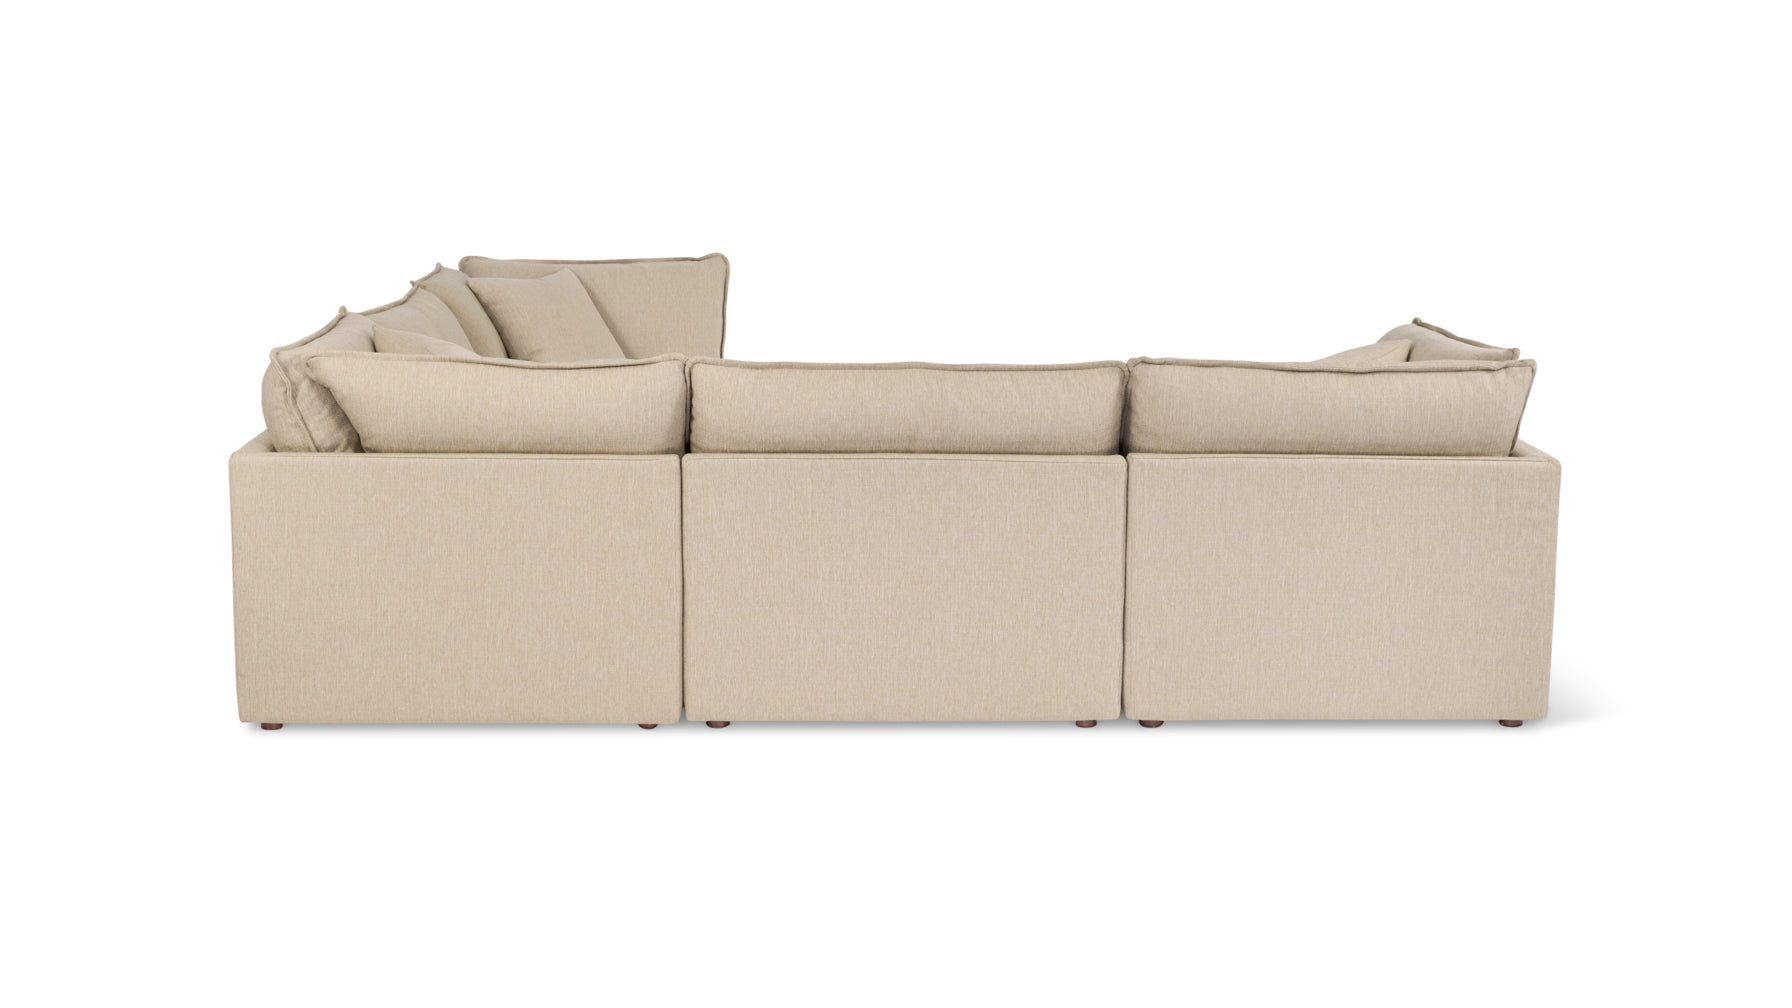 Chill Time 5-Piece Modular Sectional Closed, Biscuit - Image 3